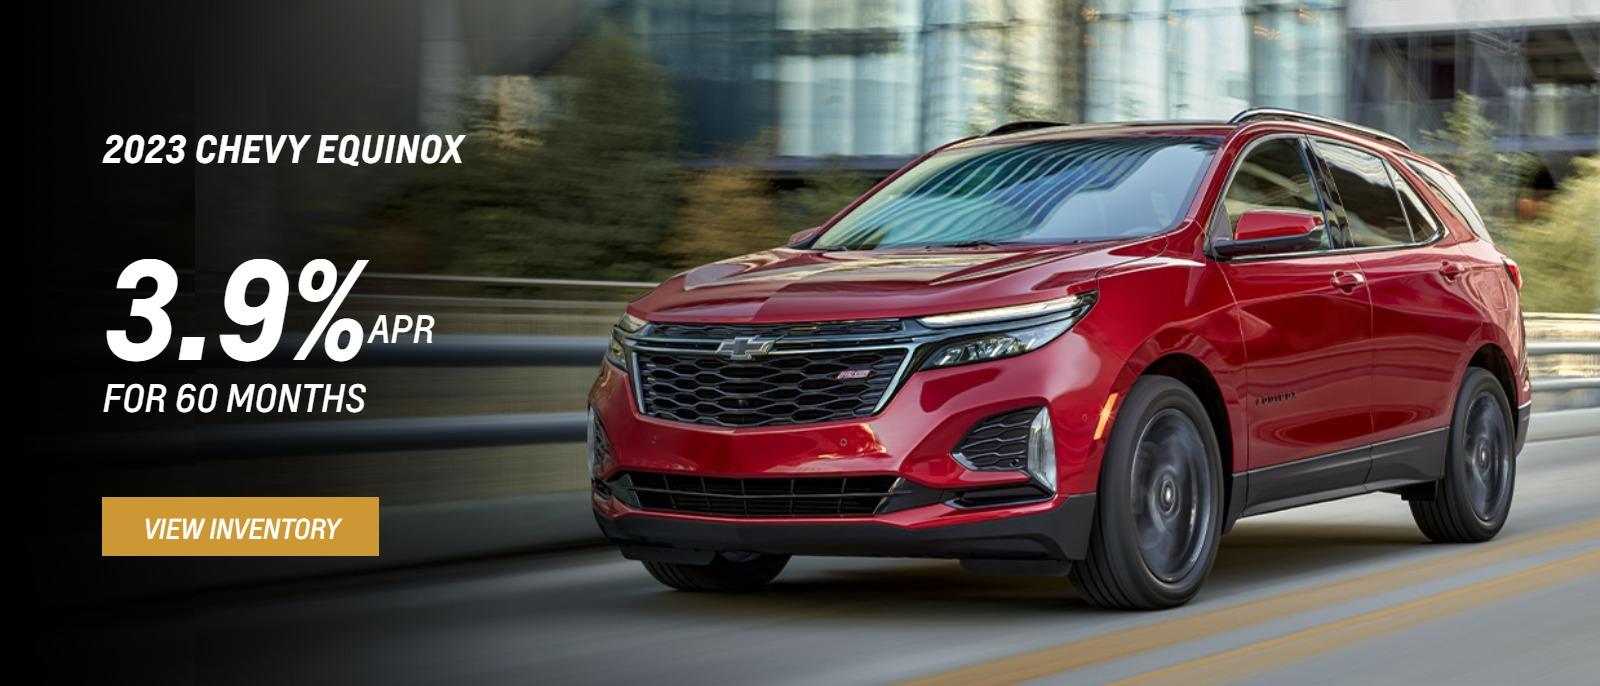 2023 Equinox 3.9 for 60 months